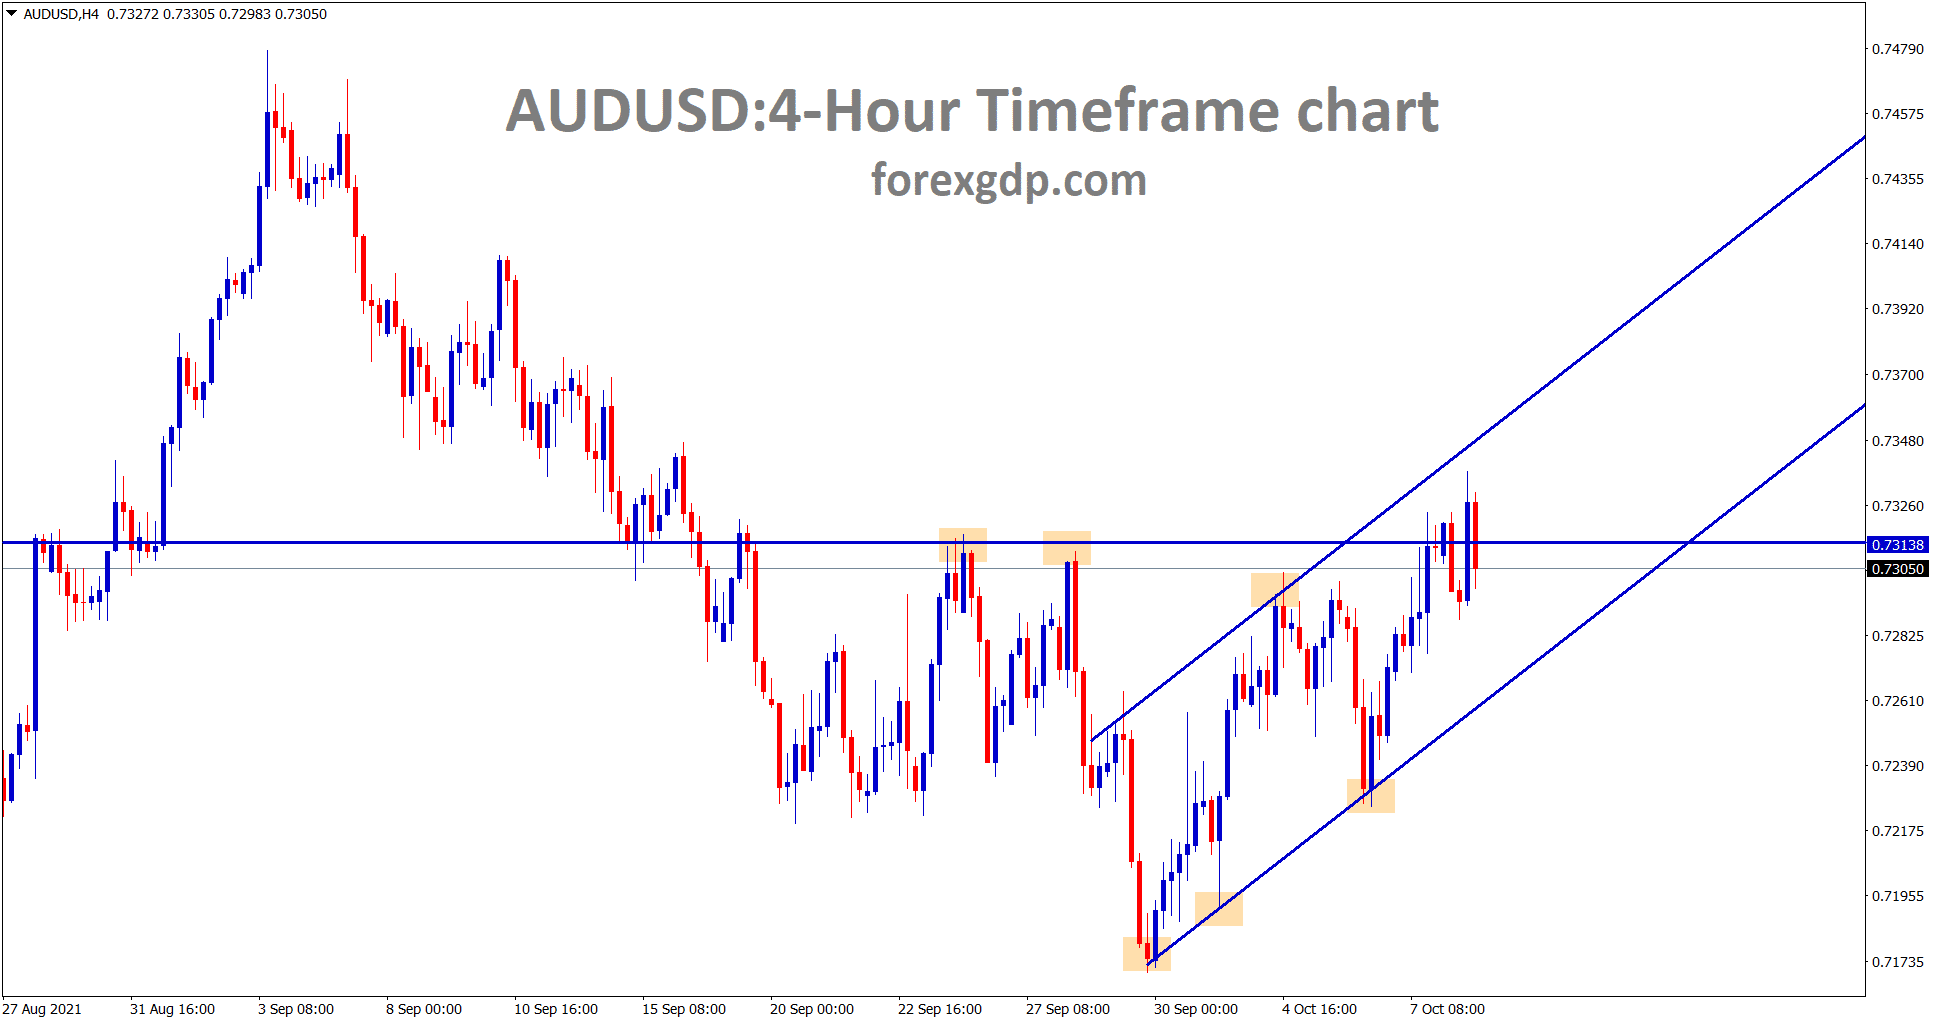 AUDUSD is consolidating at the resistance area and the higher high level of an uptrend line